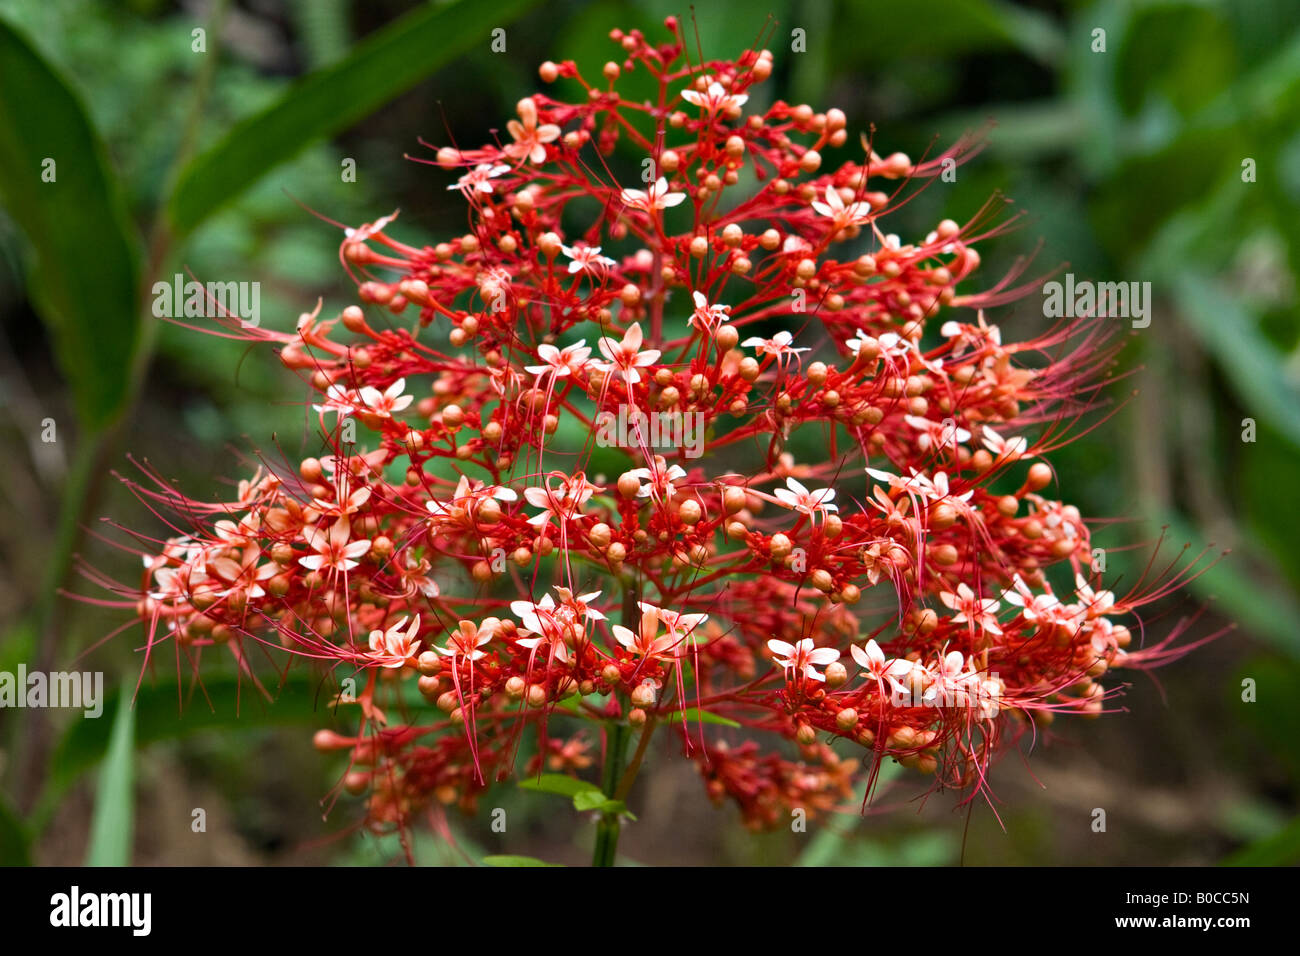 Pagoda Flower (Clerodendrum Paniculatum), Sulawesi, Indonesia, South East Asia Stock Photo